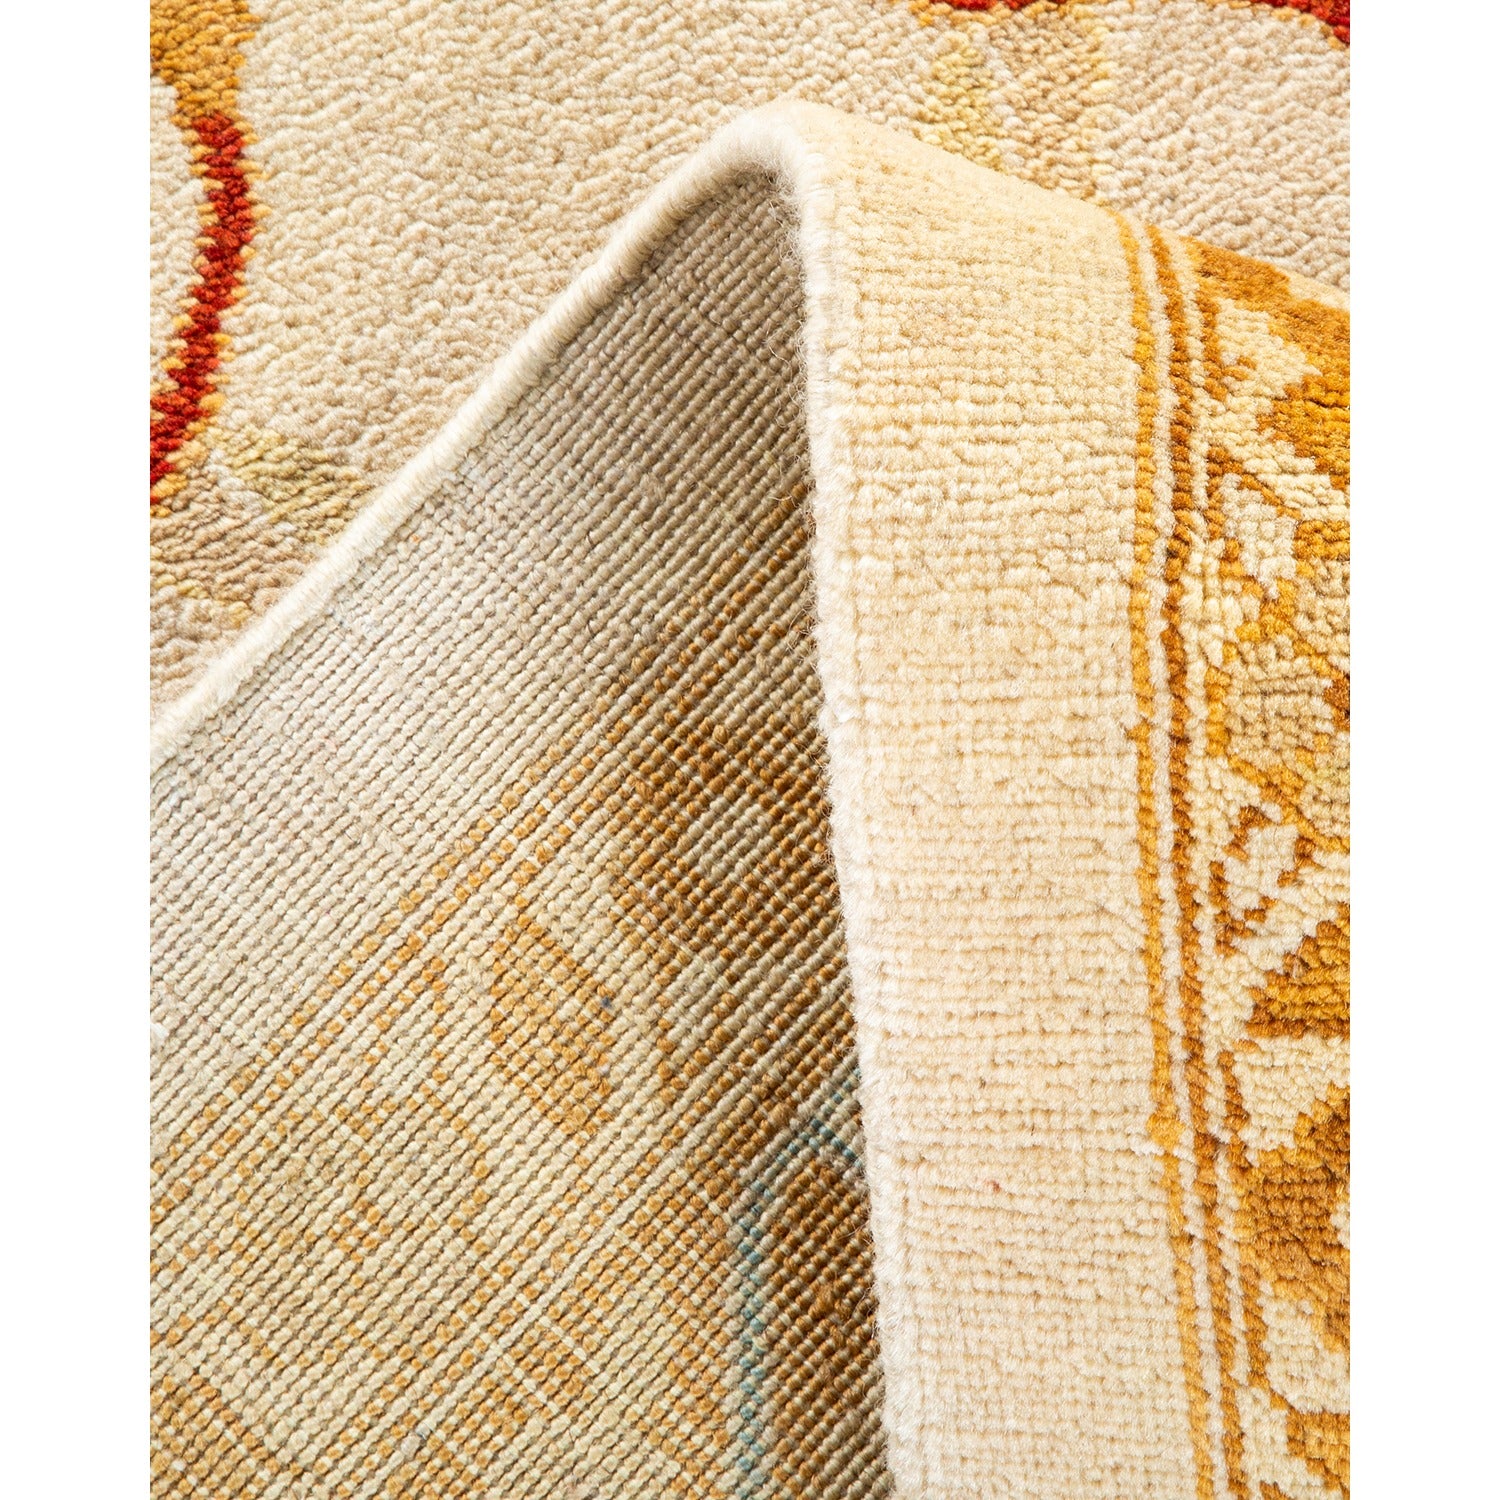 Close-up of a plush rug with folded back segments revealing intricate design and striped backing.